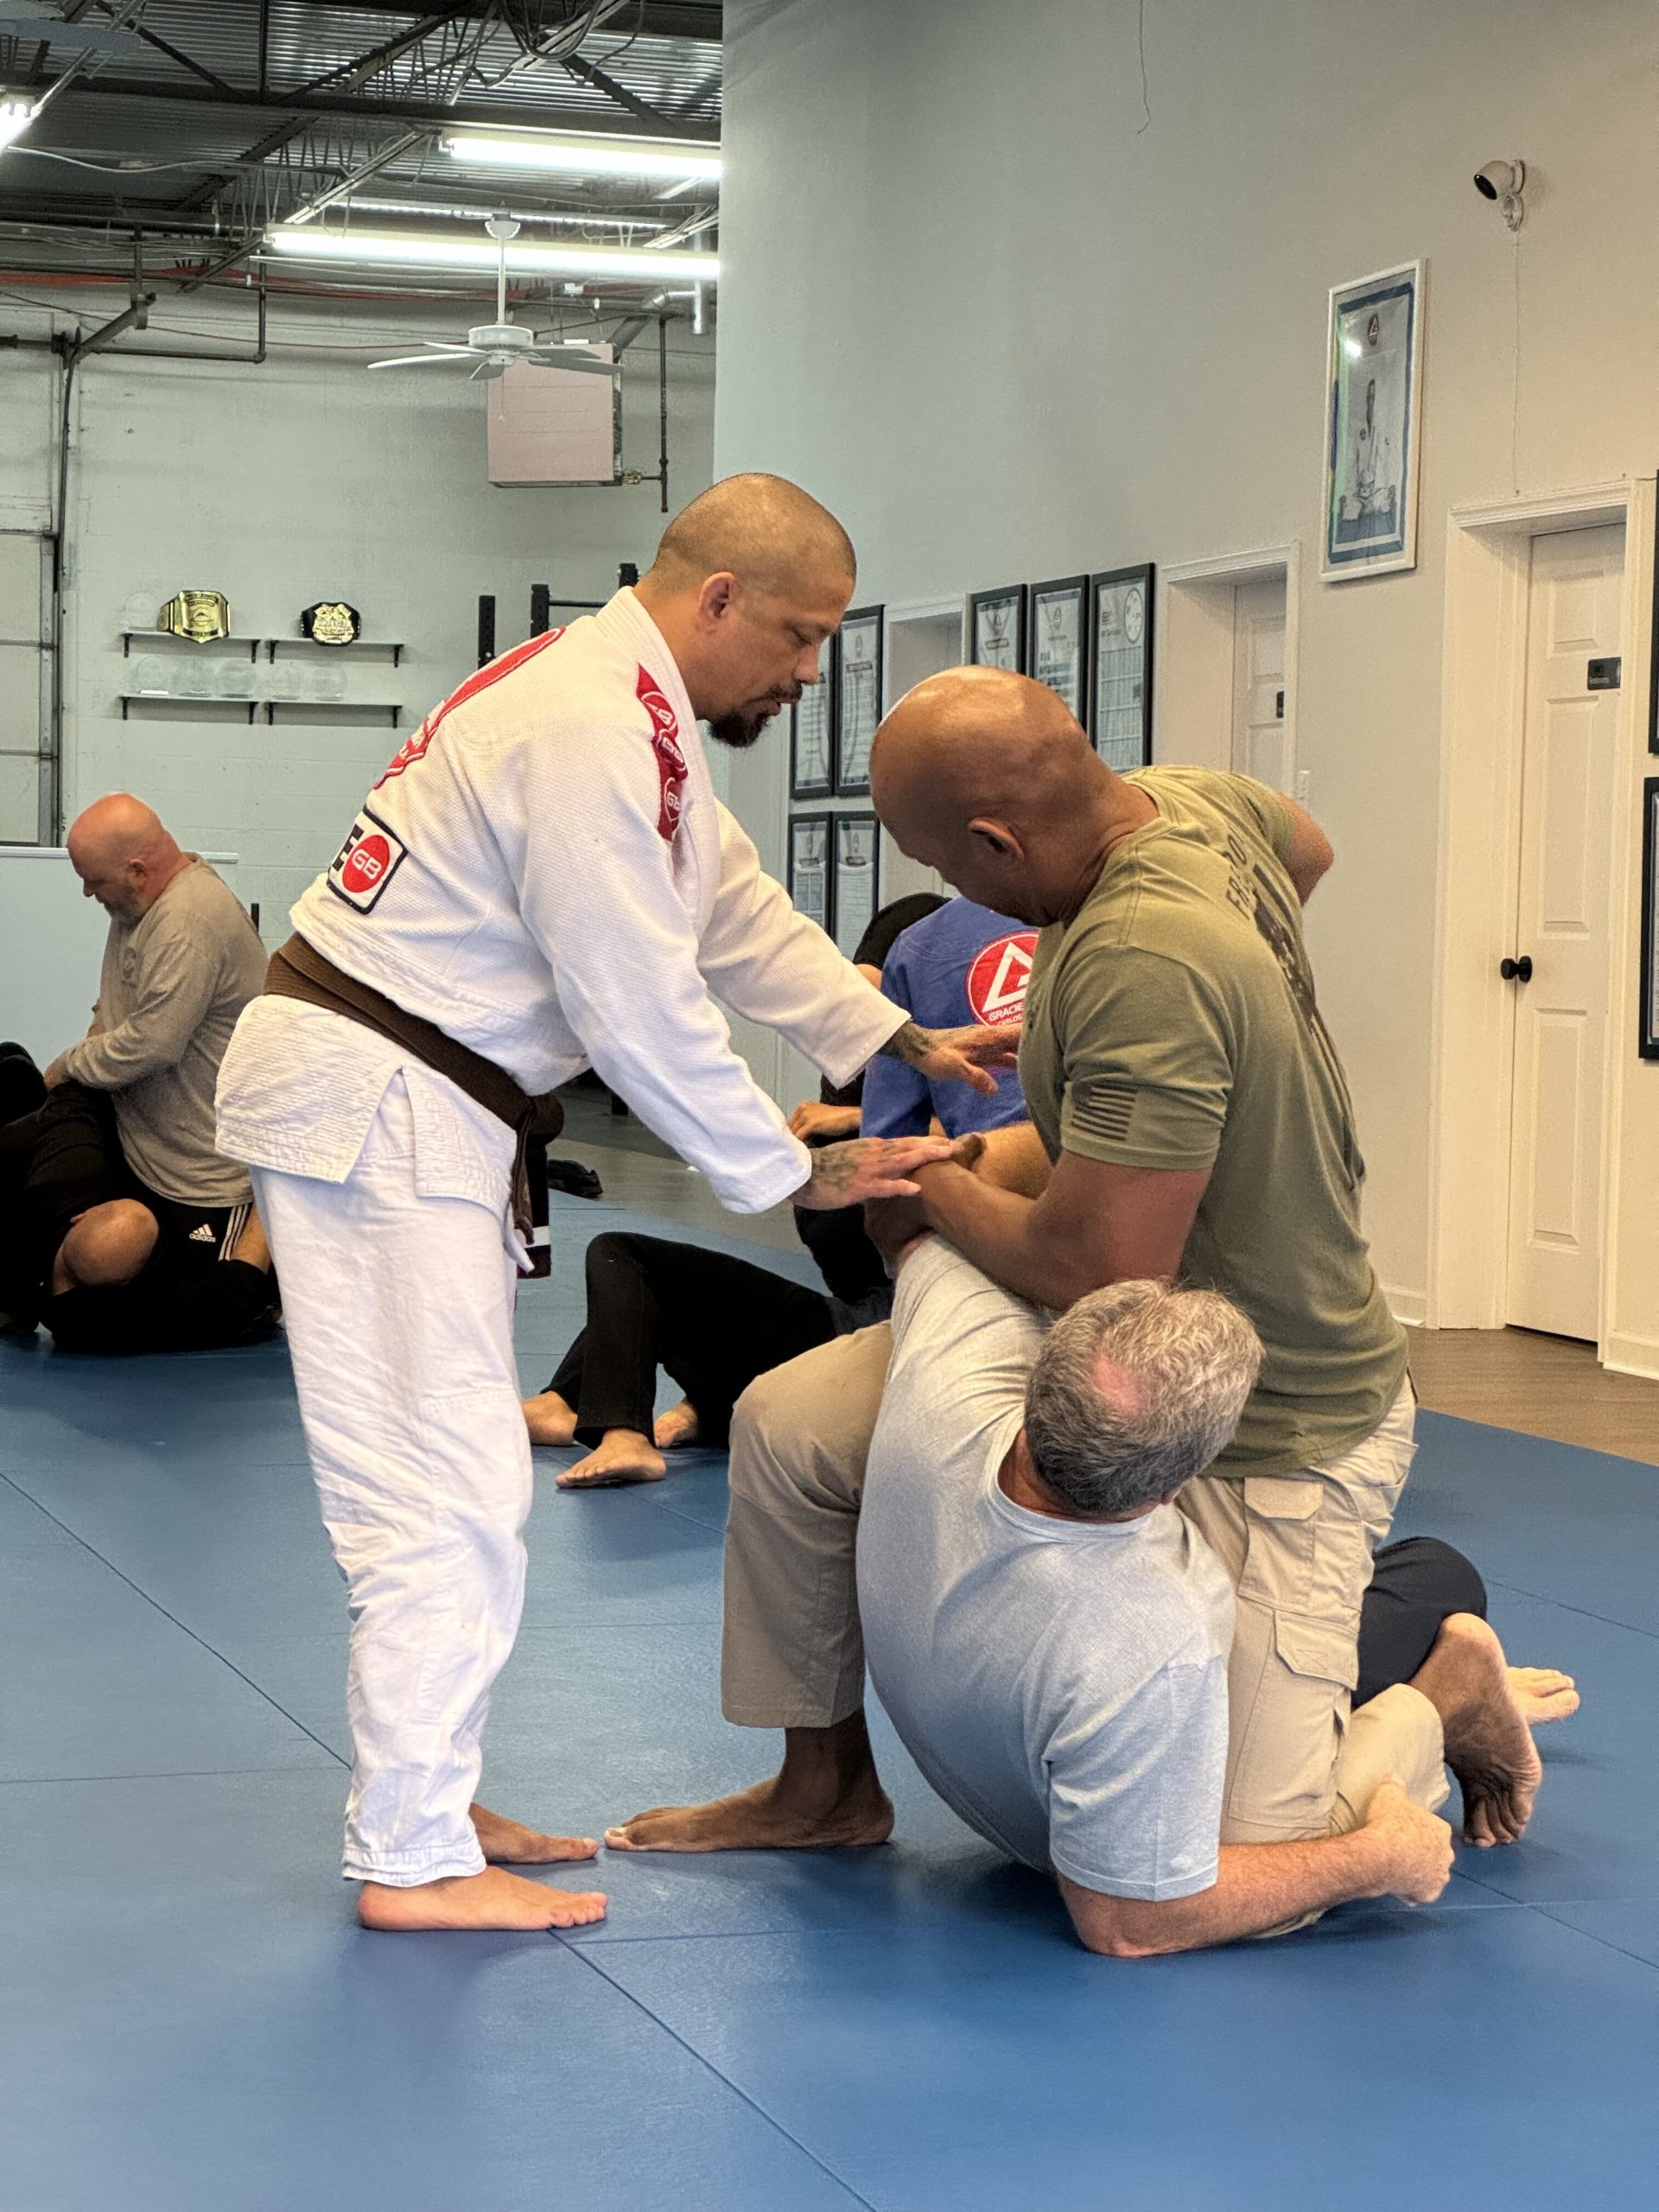 Empowering Our Federal Agents: Gracie Barra Chantilly Hosts Self-Defense Seminar with U.S. Treasury Department Special Agents